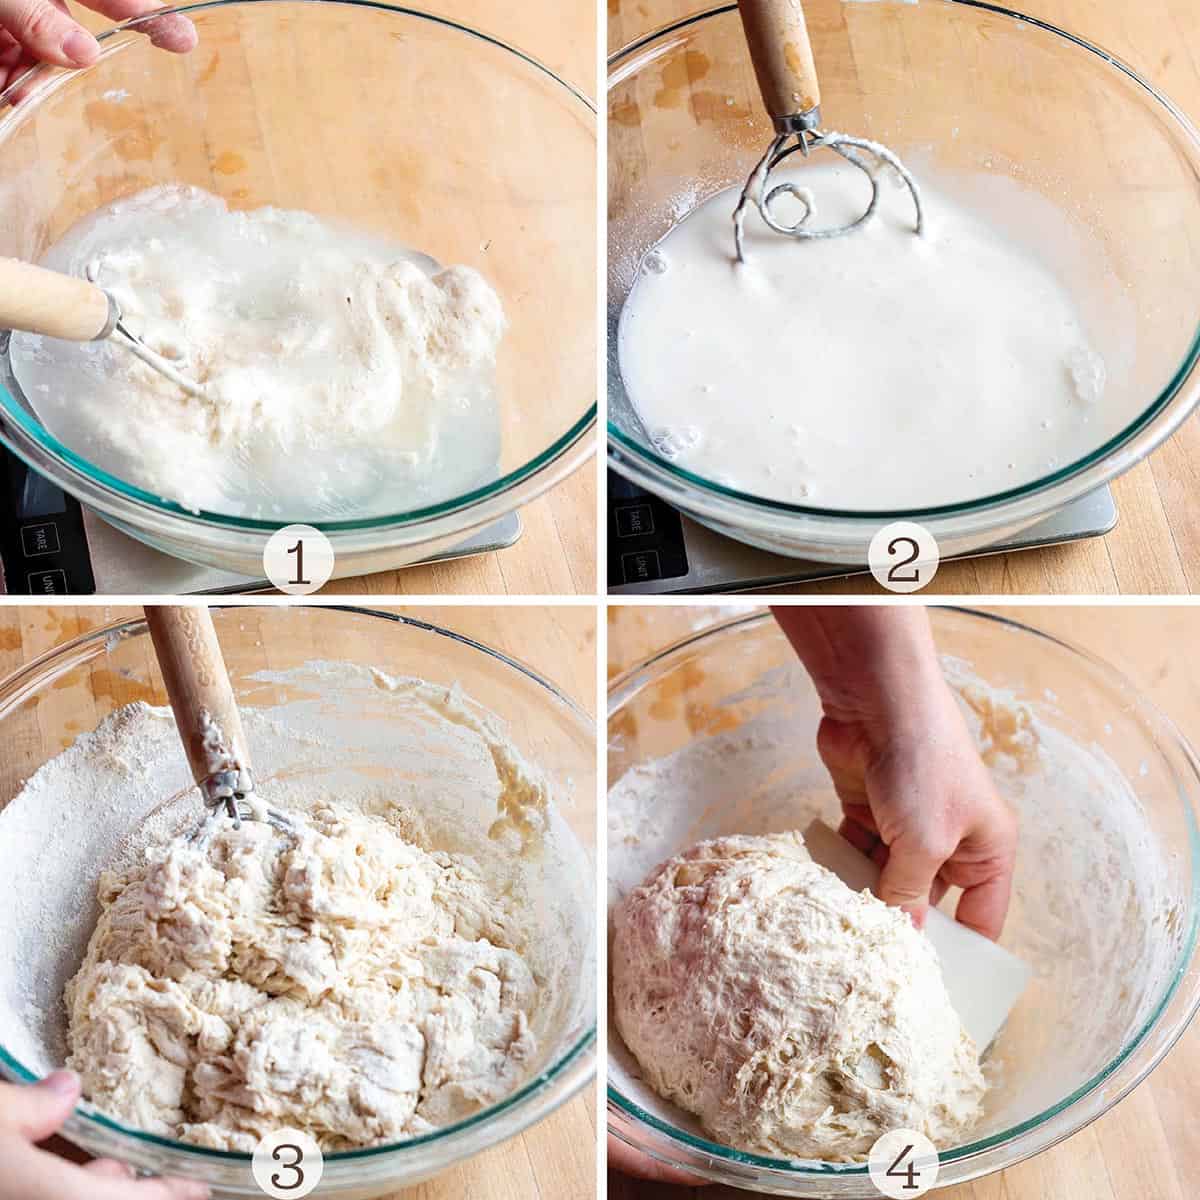 Four images of mixing a loaf of sourdough bread.